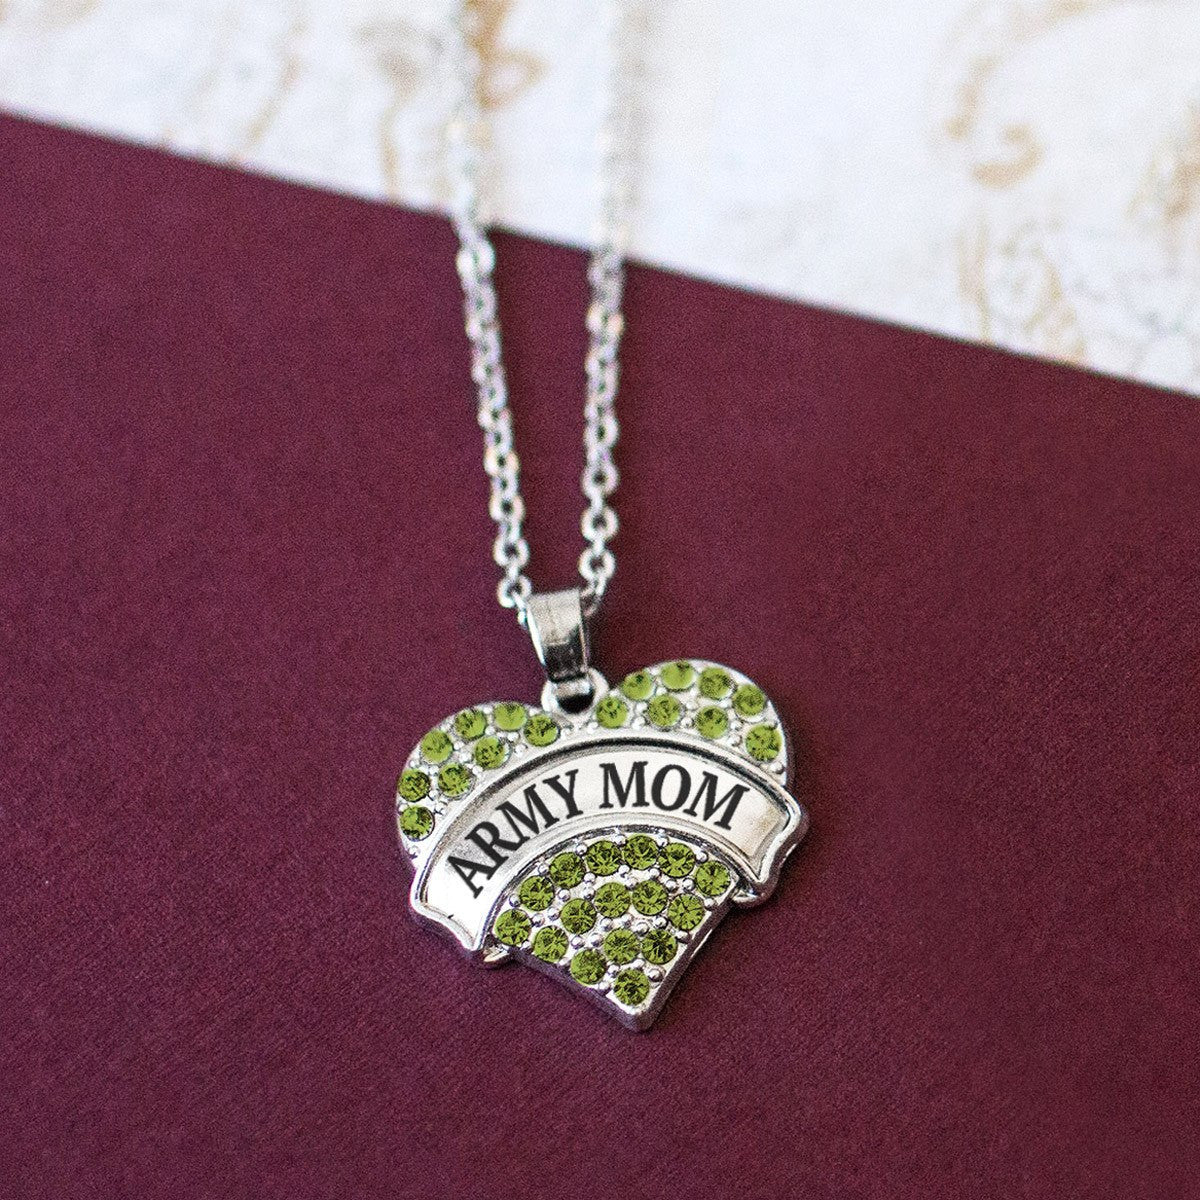 Army Mom Charm Jewelry Collection